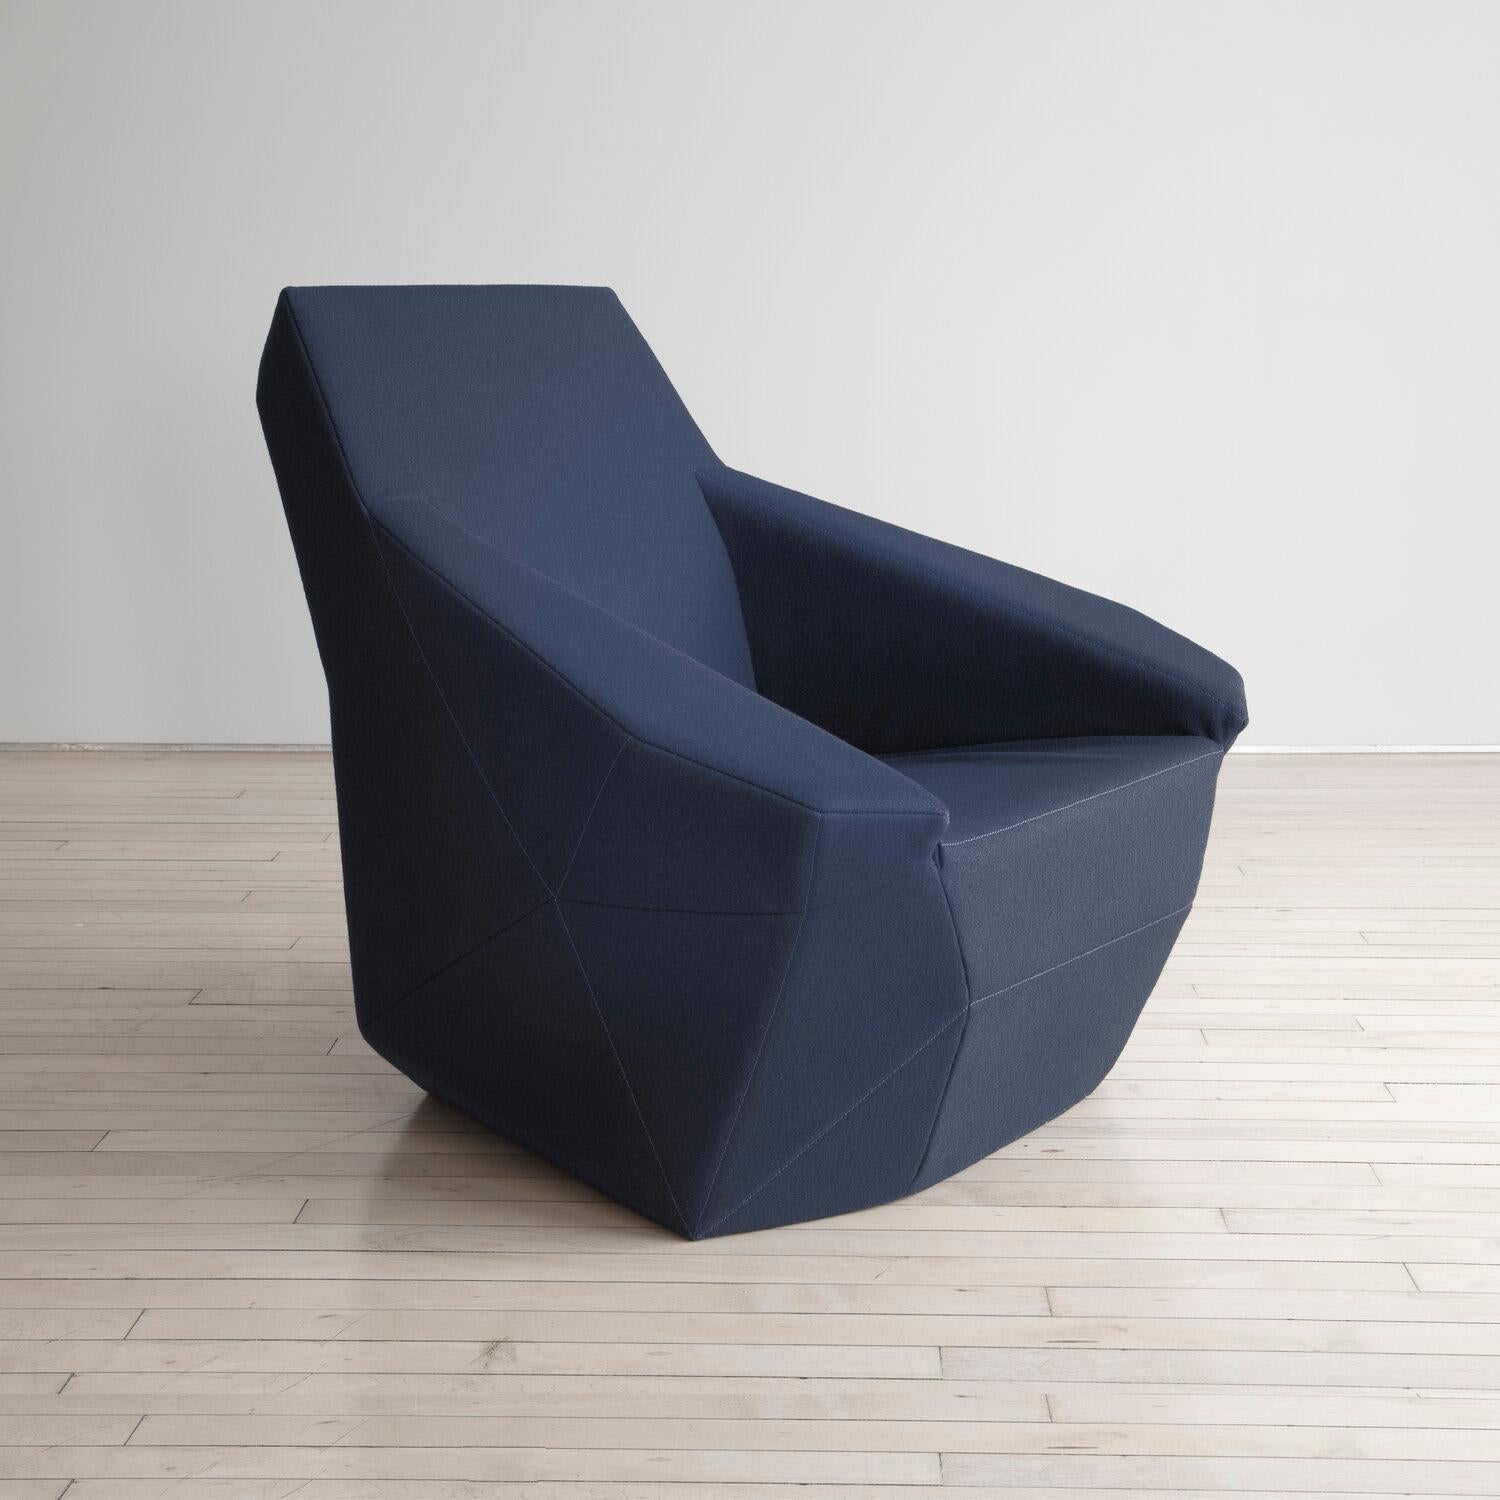 French Jyn & Jon Chair and Ottoman by Pablo Reinoso (Domeau & Pérès Edition) For Sale